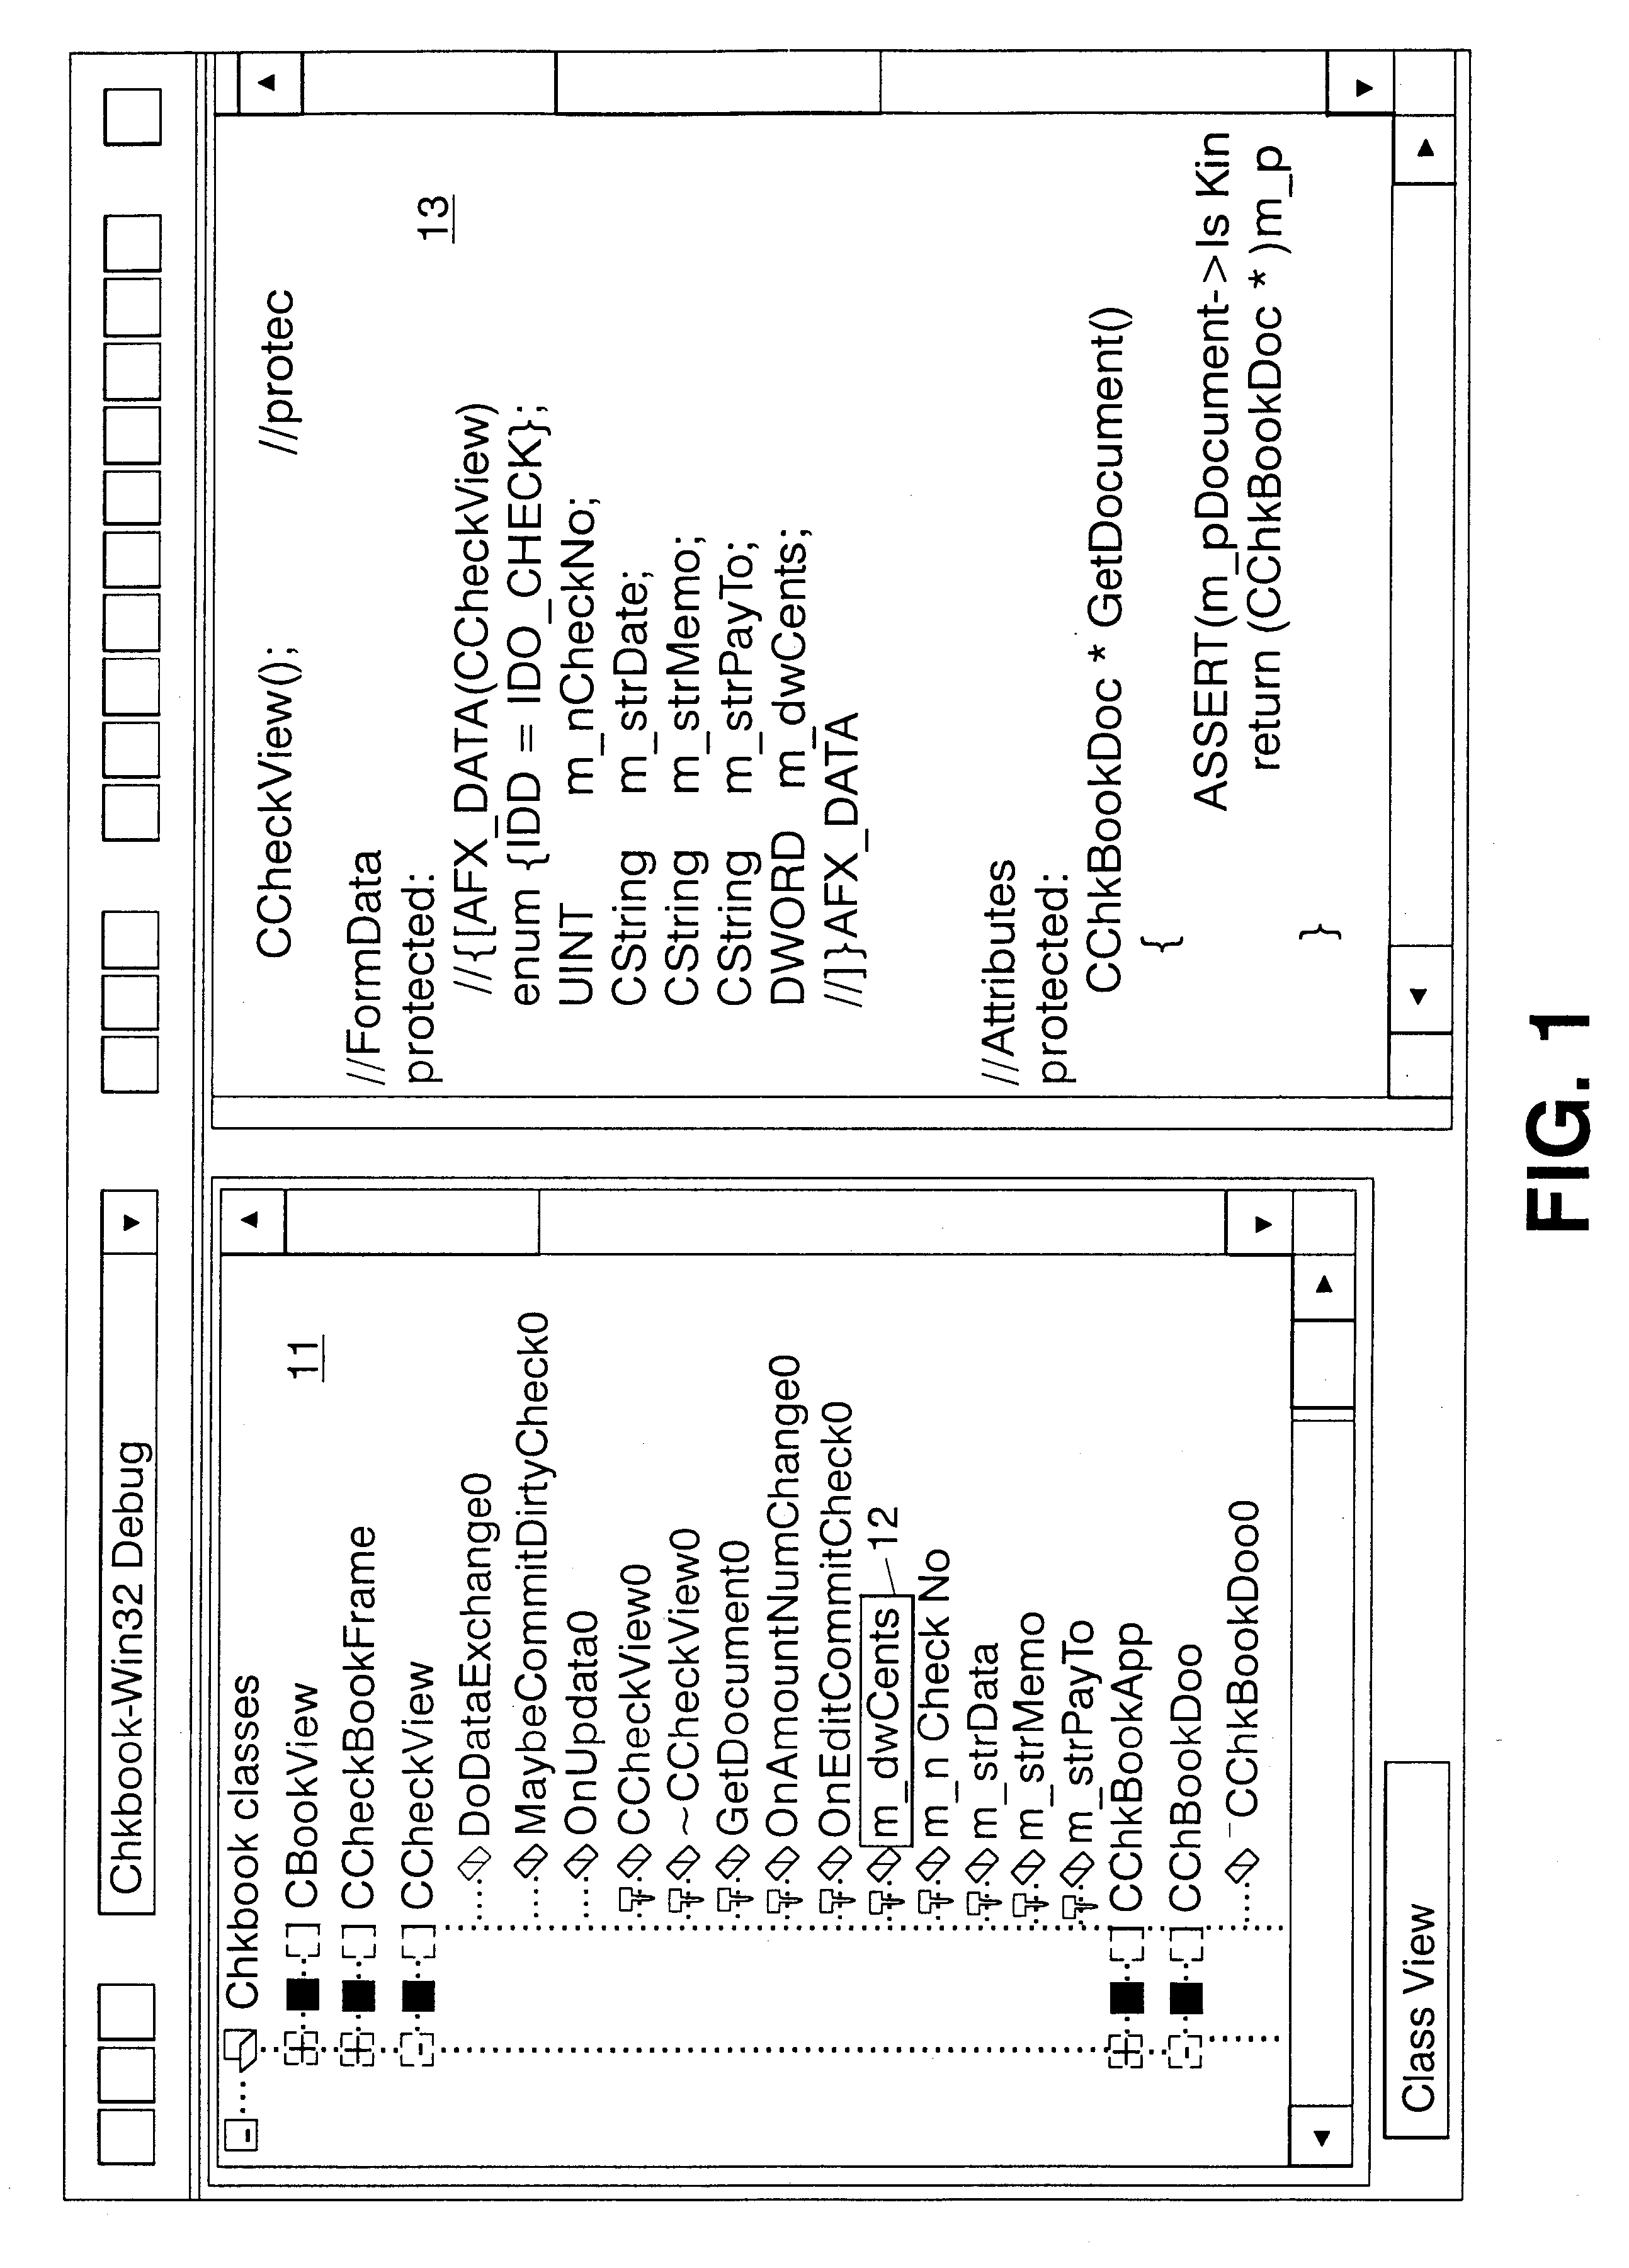 Method and system for analyzing and displaying program information